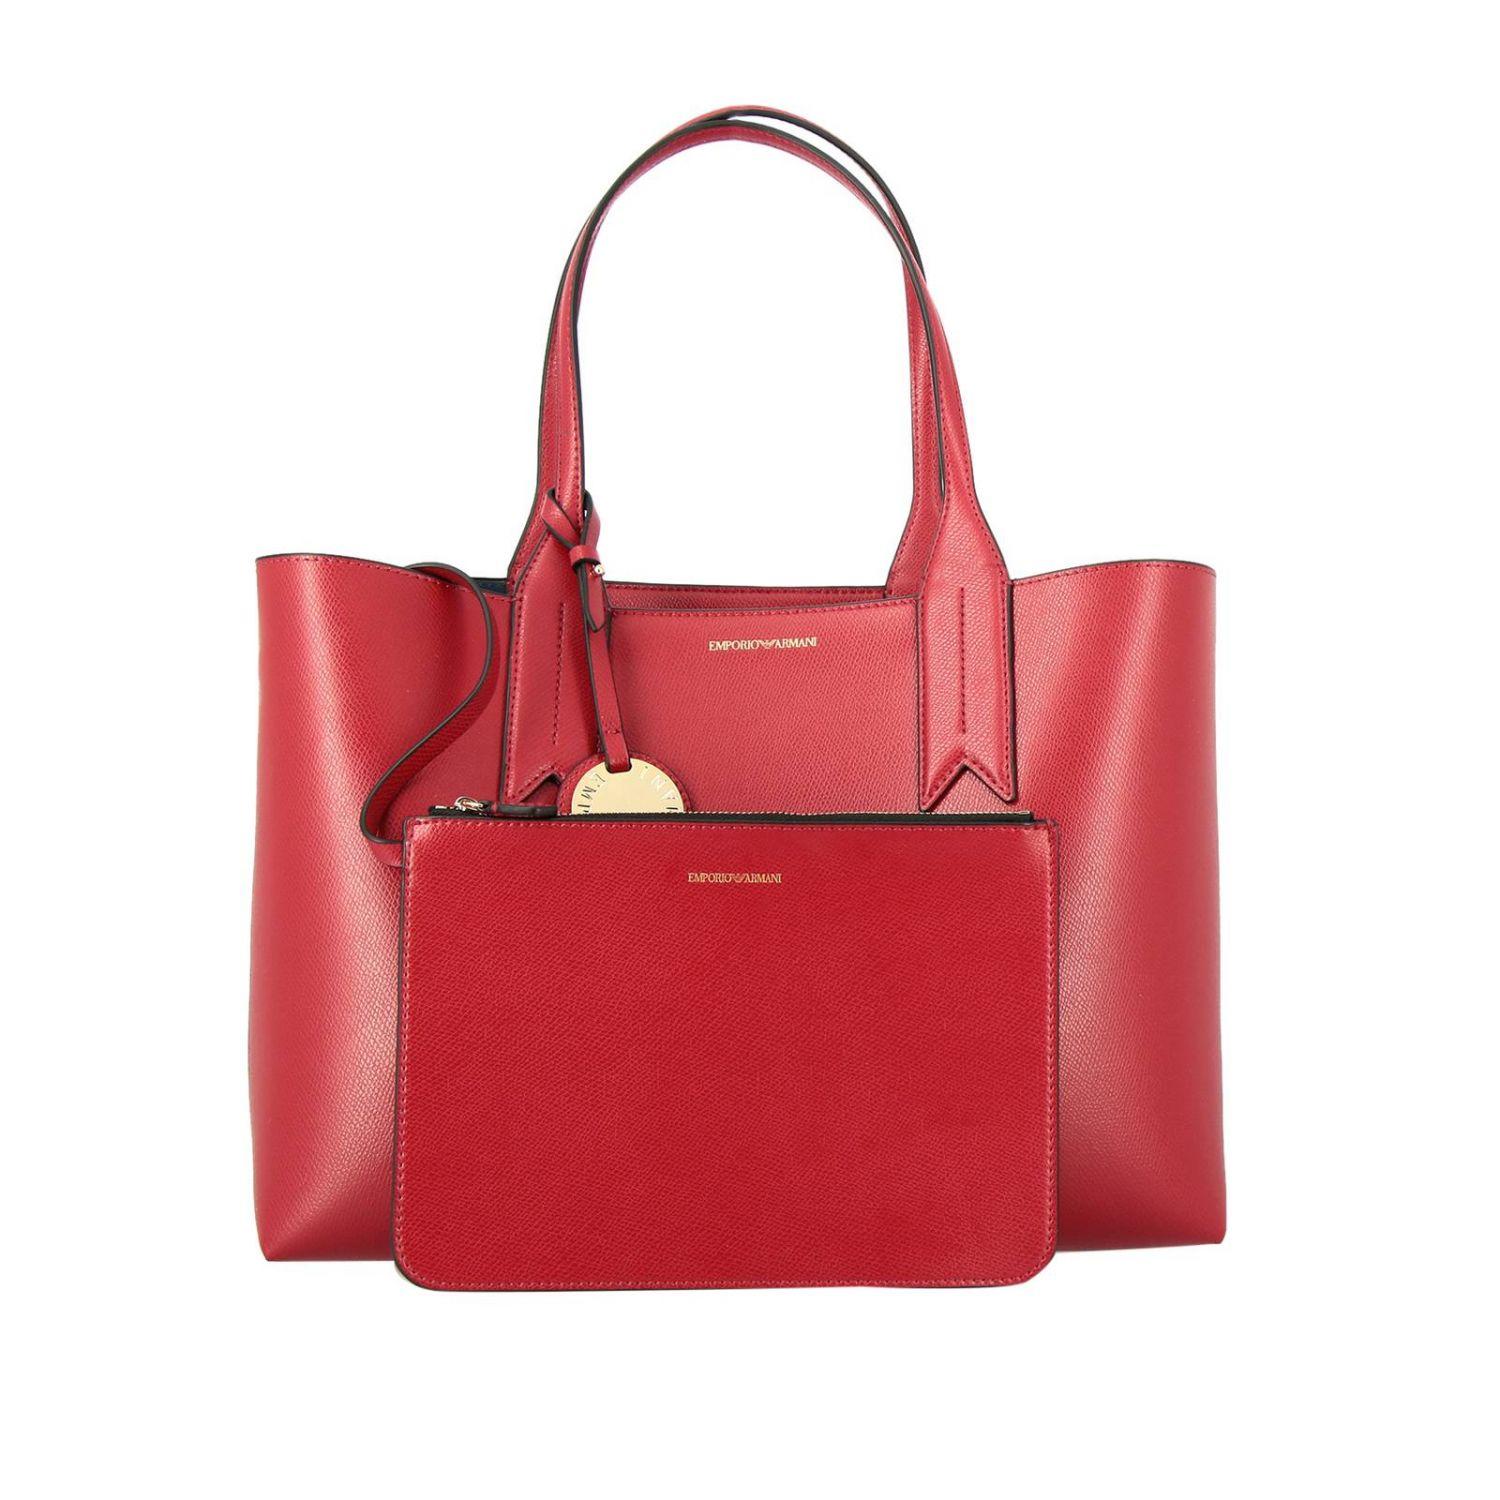 Emporio Armani Shopping Bag In Synthetic Leather With Logo in Red - Lyst